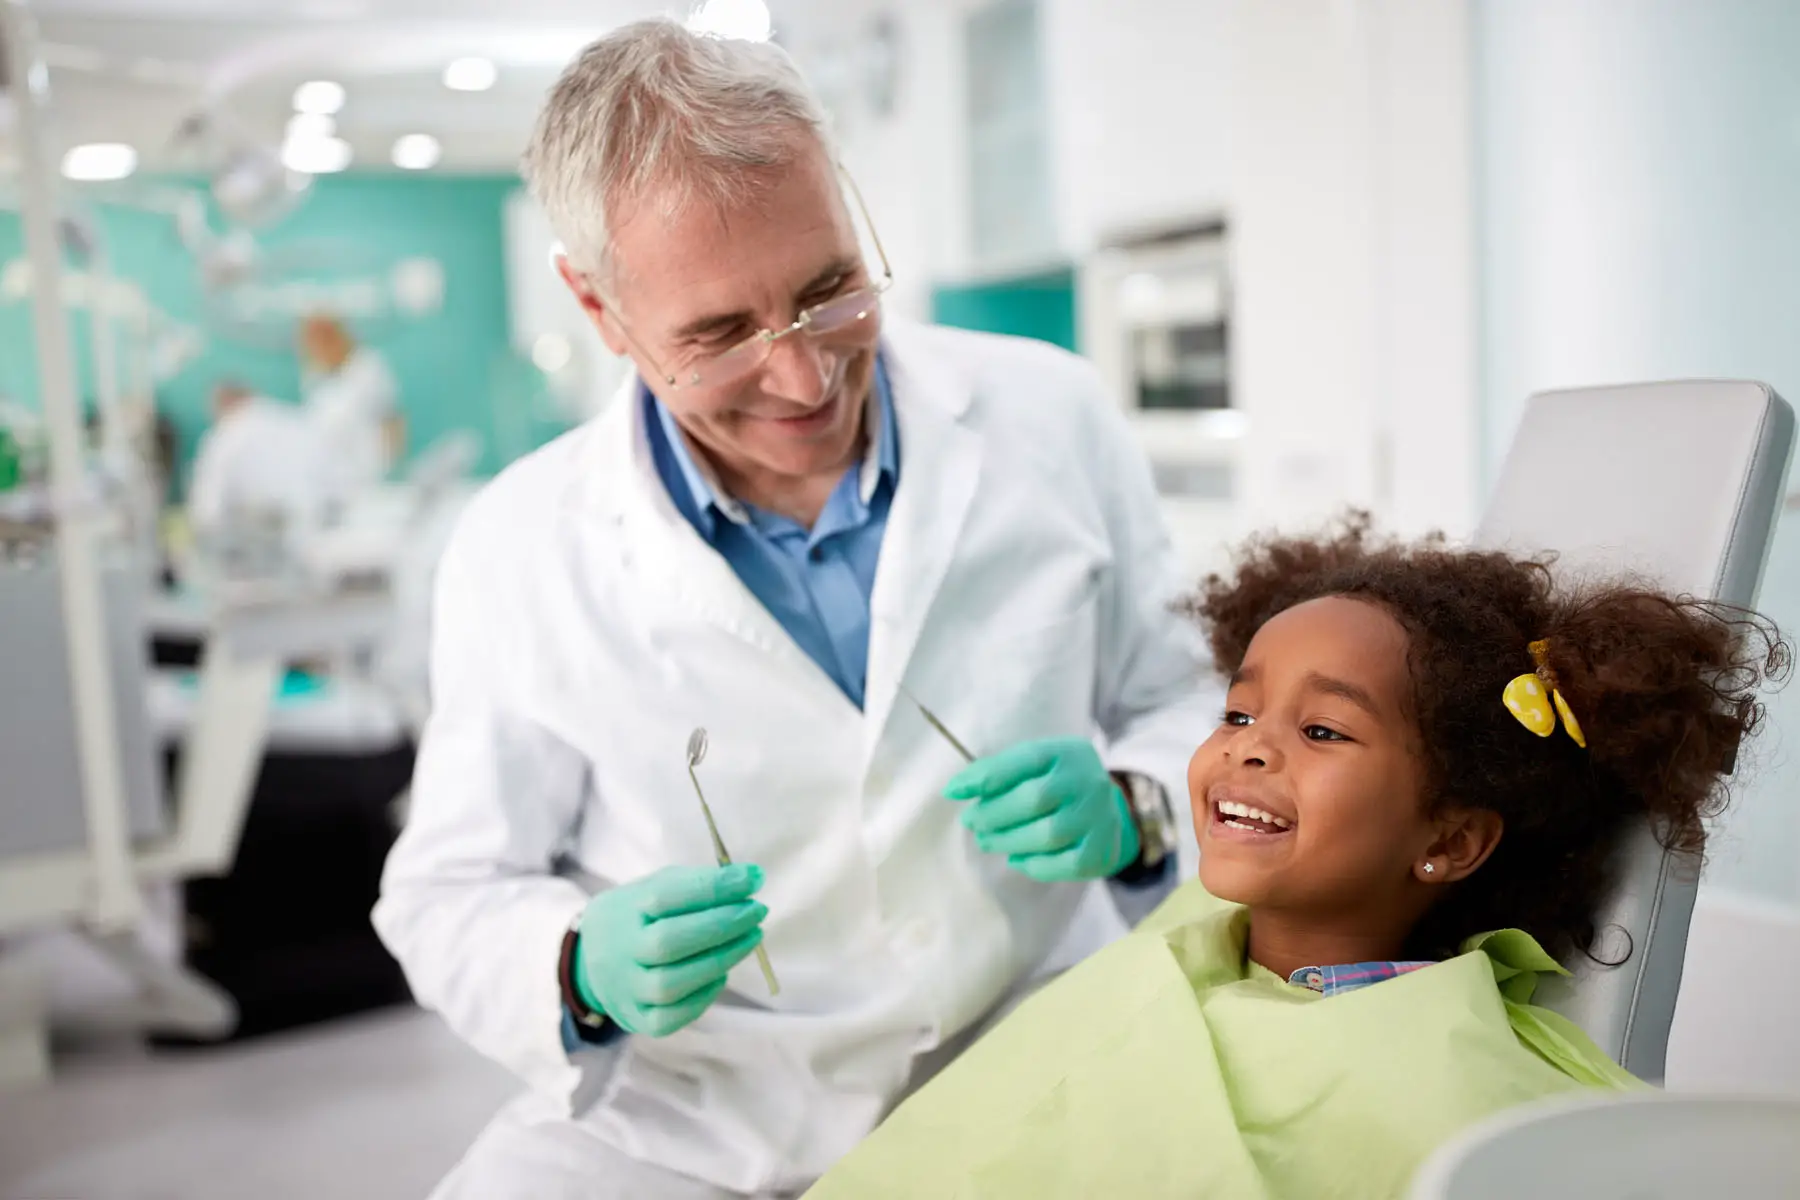 A dentist examines a child